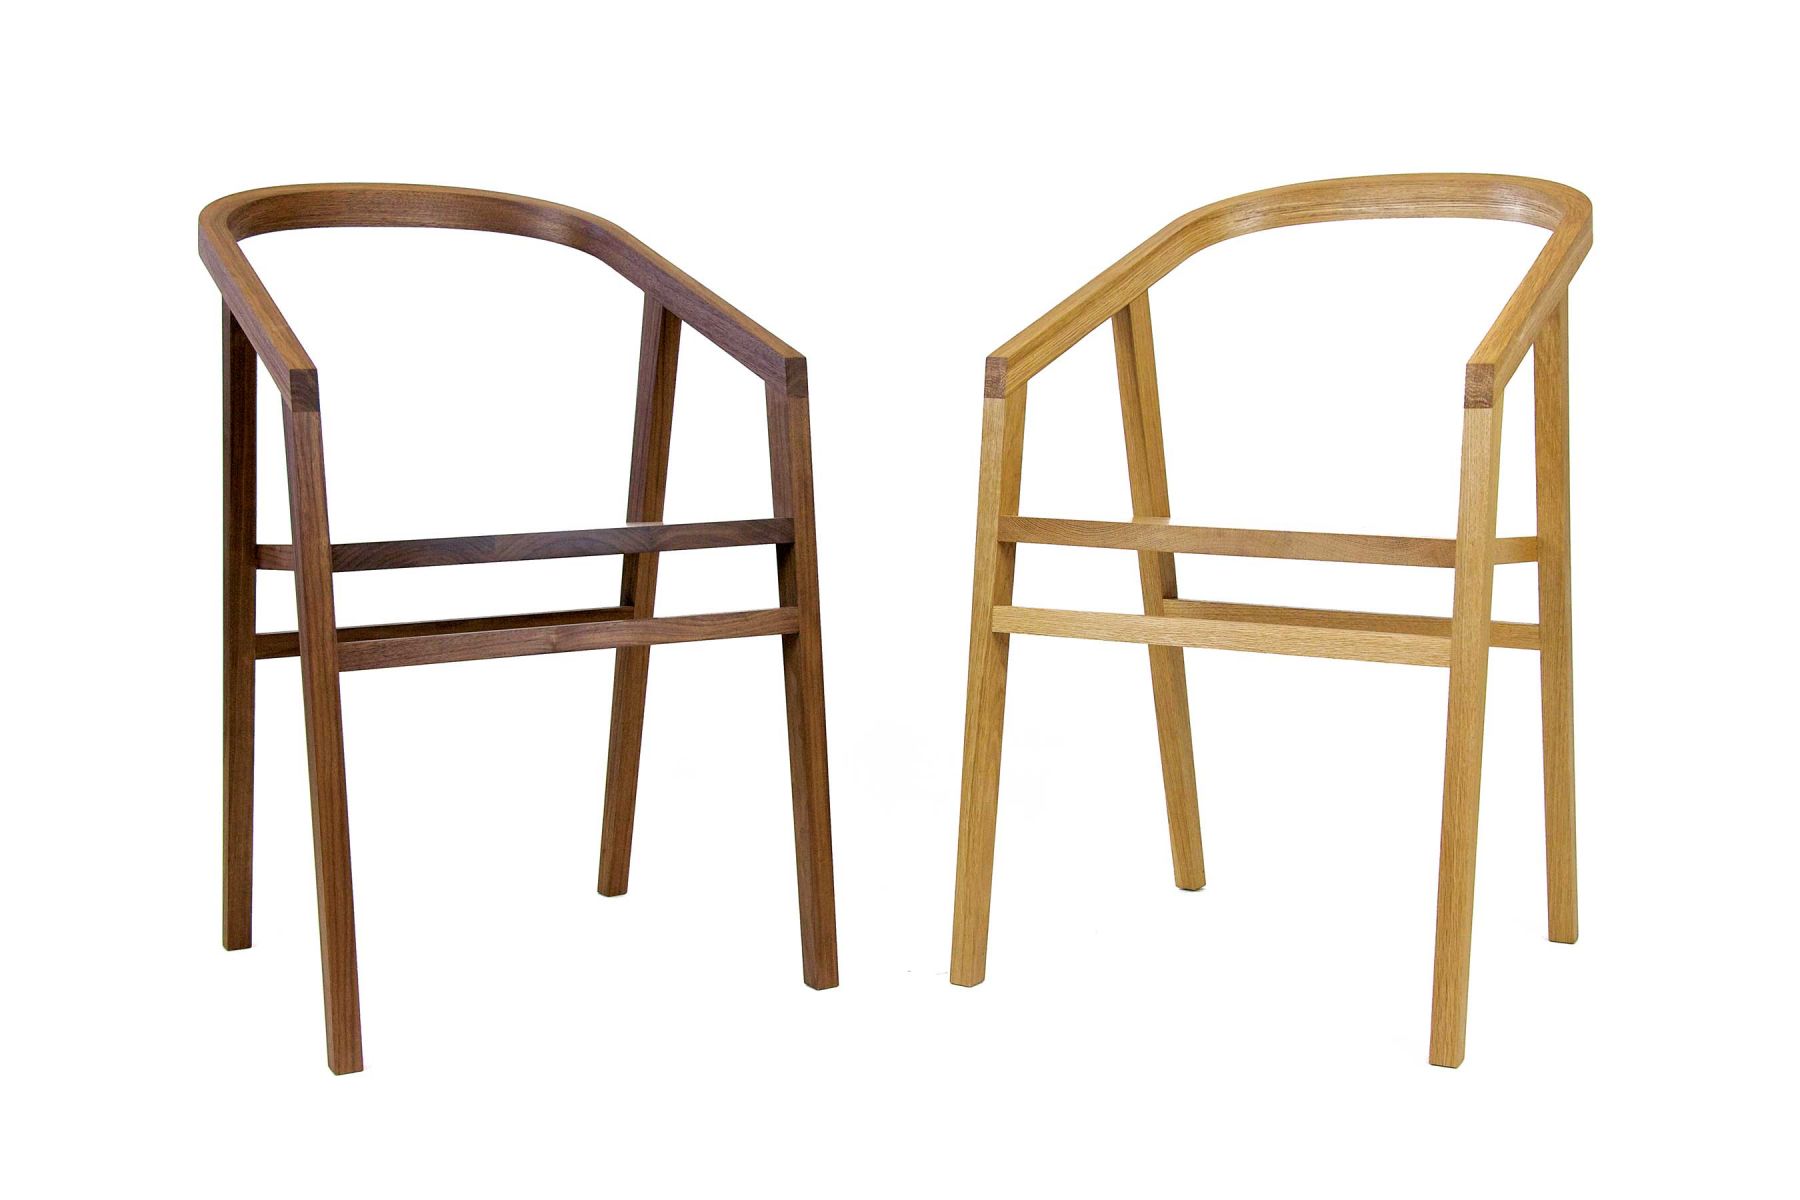 Chairs by Young & Norgate